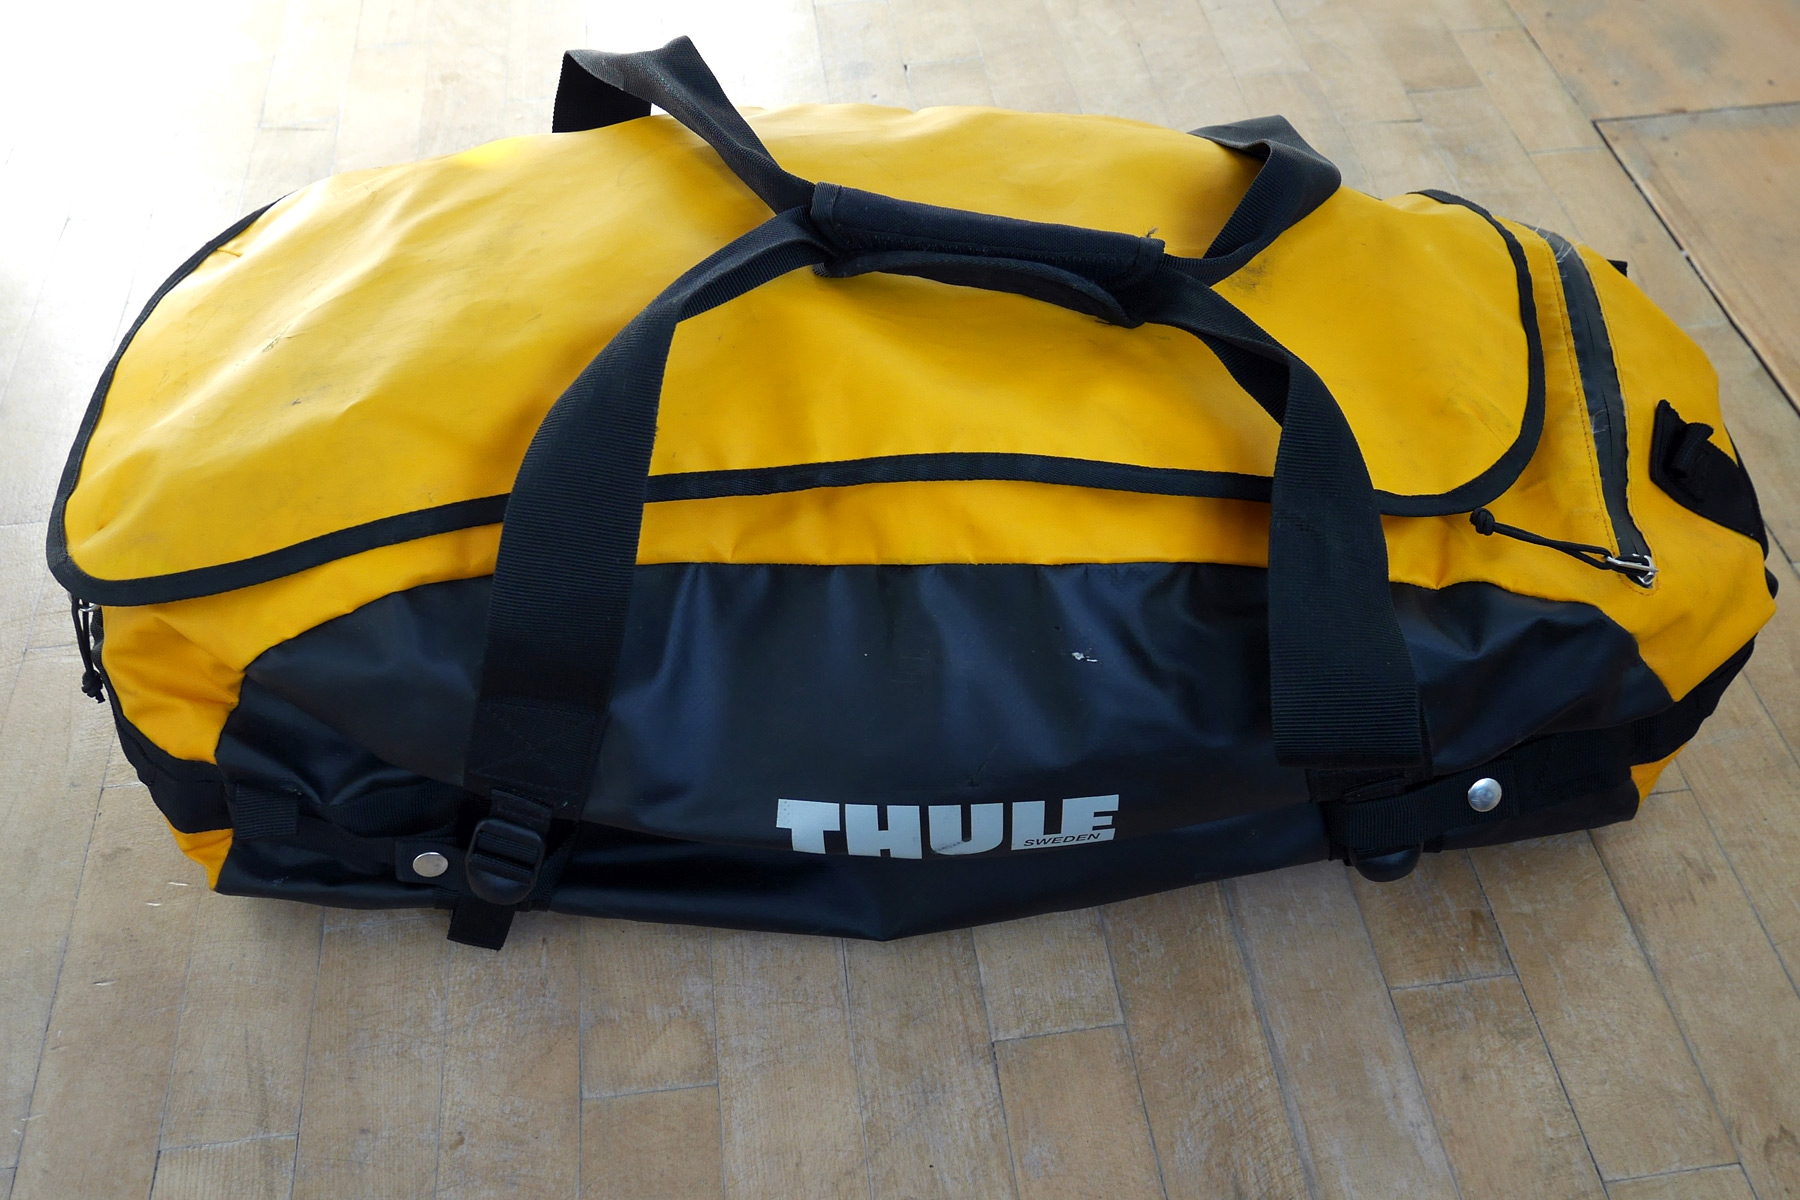 Long-term Review: Thule’s Chasm Water-Resistant Duffel Taken to the Races & into the Air